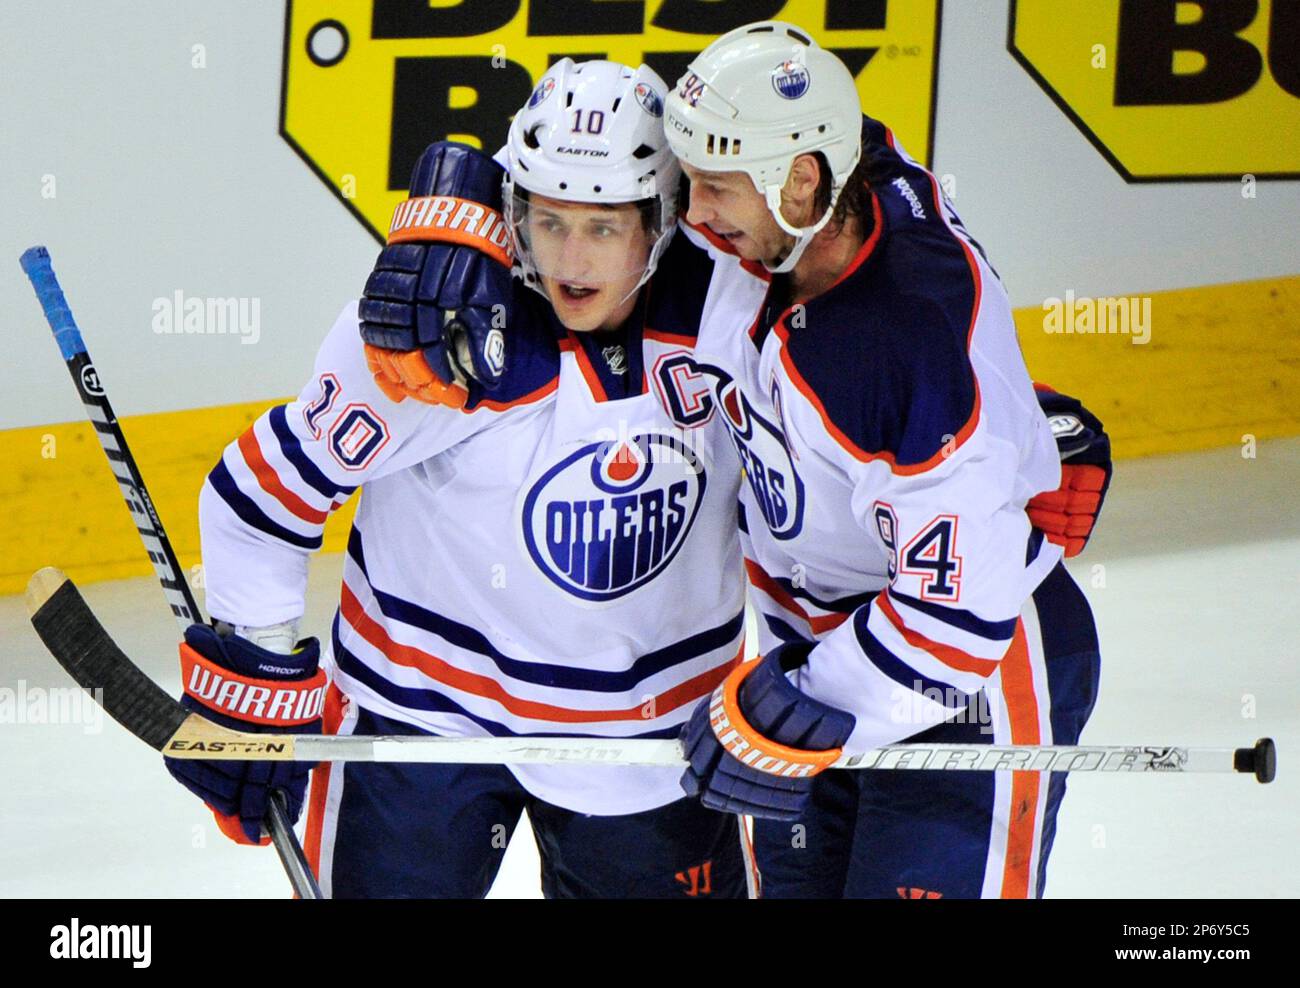 Edmonton Oilers Ryan Smyth, upper, is congratulated by Shawn Horcoff (10)  after Smyth scored past San Jose Sharks goalie Vesa Toskala, right, of  Finland, and Josh Gorges, left, in the third period